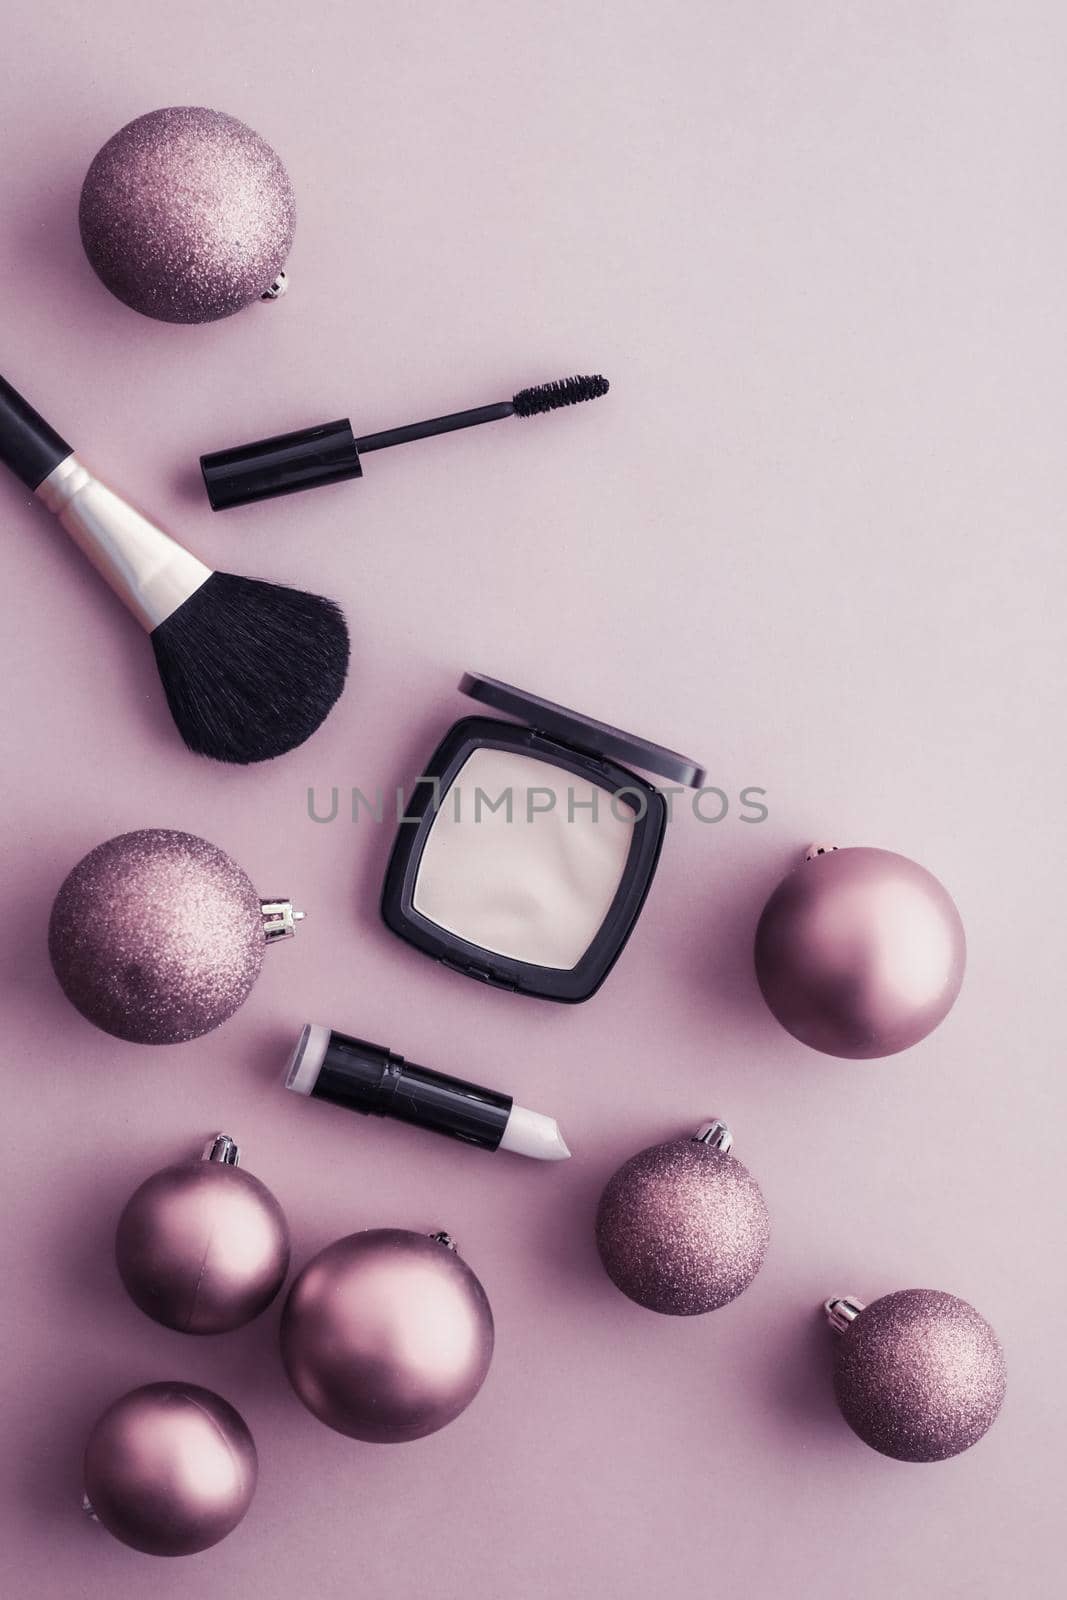 Make-up and cosmetics product set for beauty brand Christmas sale promotion, luxury purple flatlay background as holiday design by Anneleven